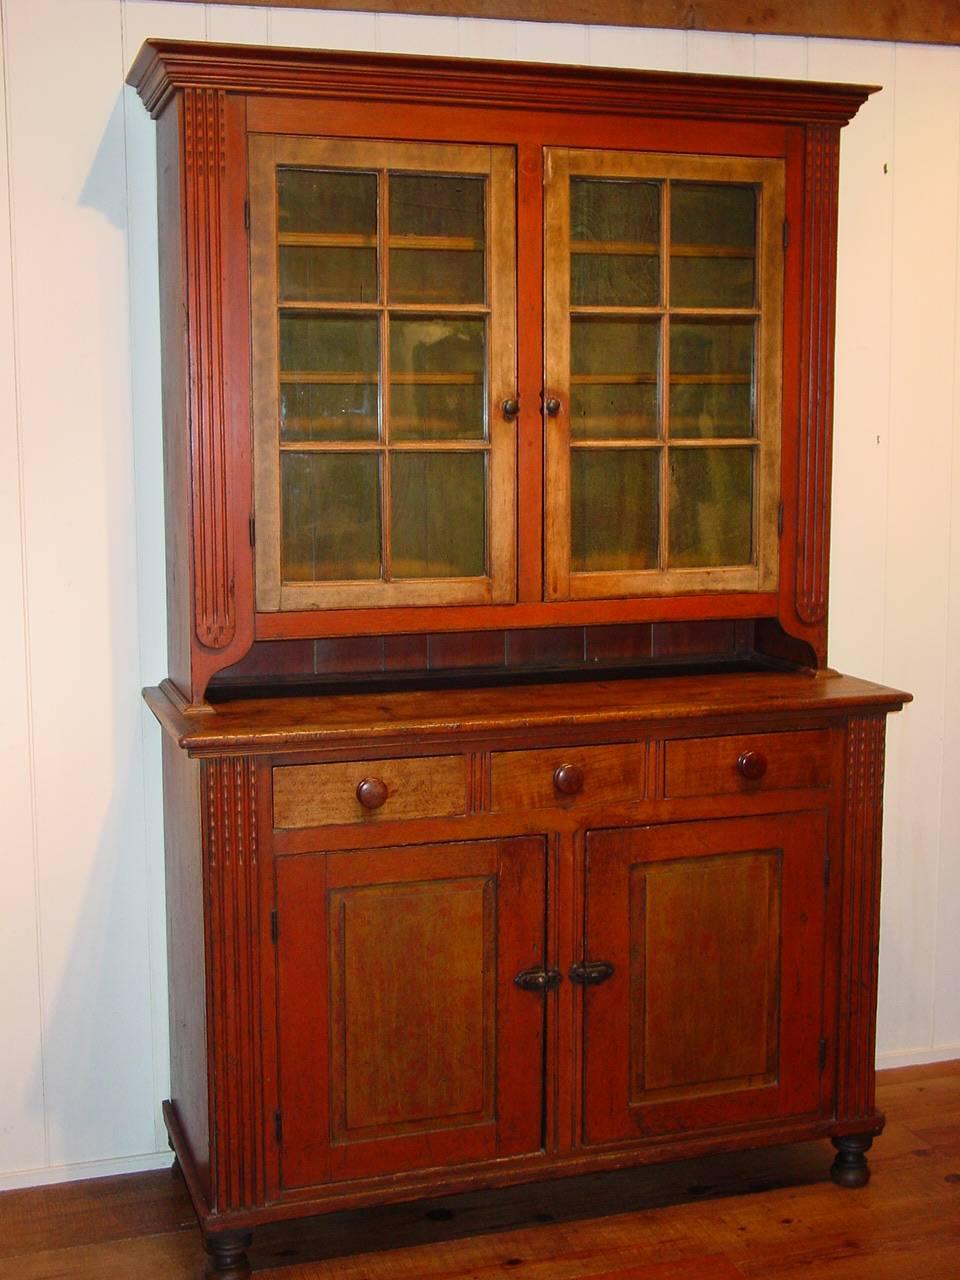 A Pennsylvania pine two-part Dutch cupboard retaining its original red-painted finish with yellow smoke-decorated doors and yellow interior. This Dutch cupboard, from Lancaster, Pennsylvania, is further distinguished by the gouge carved pilasters